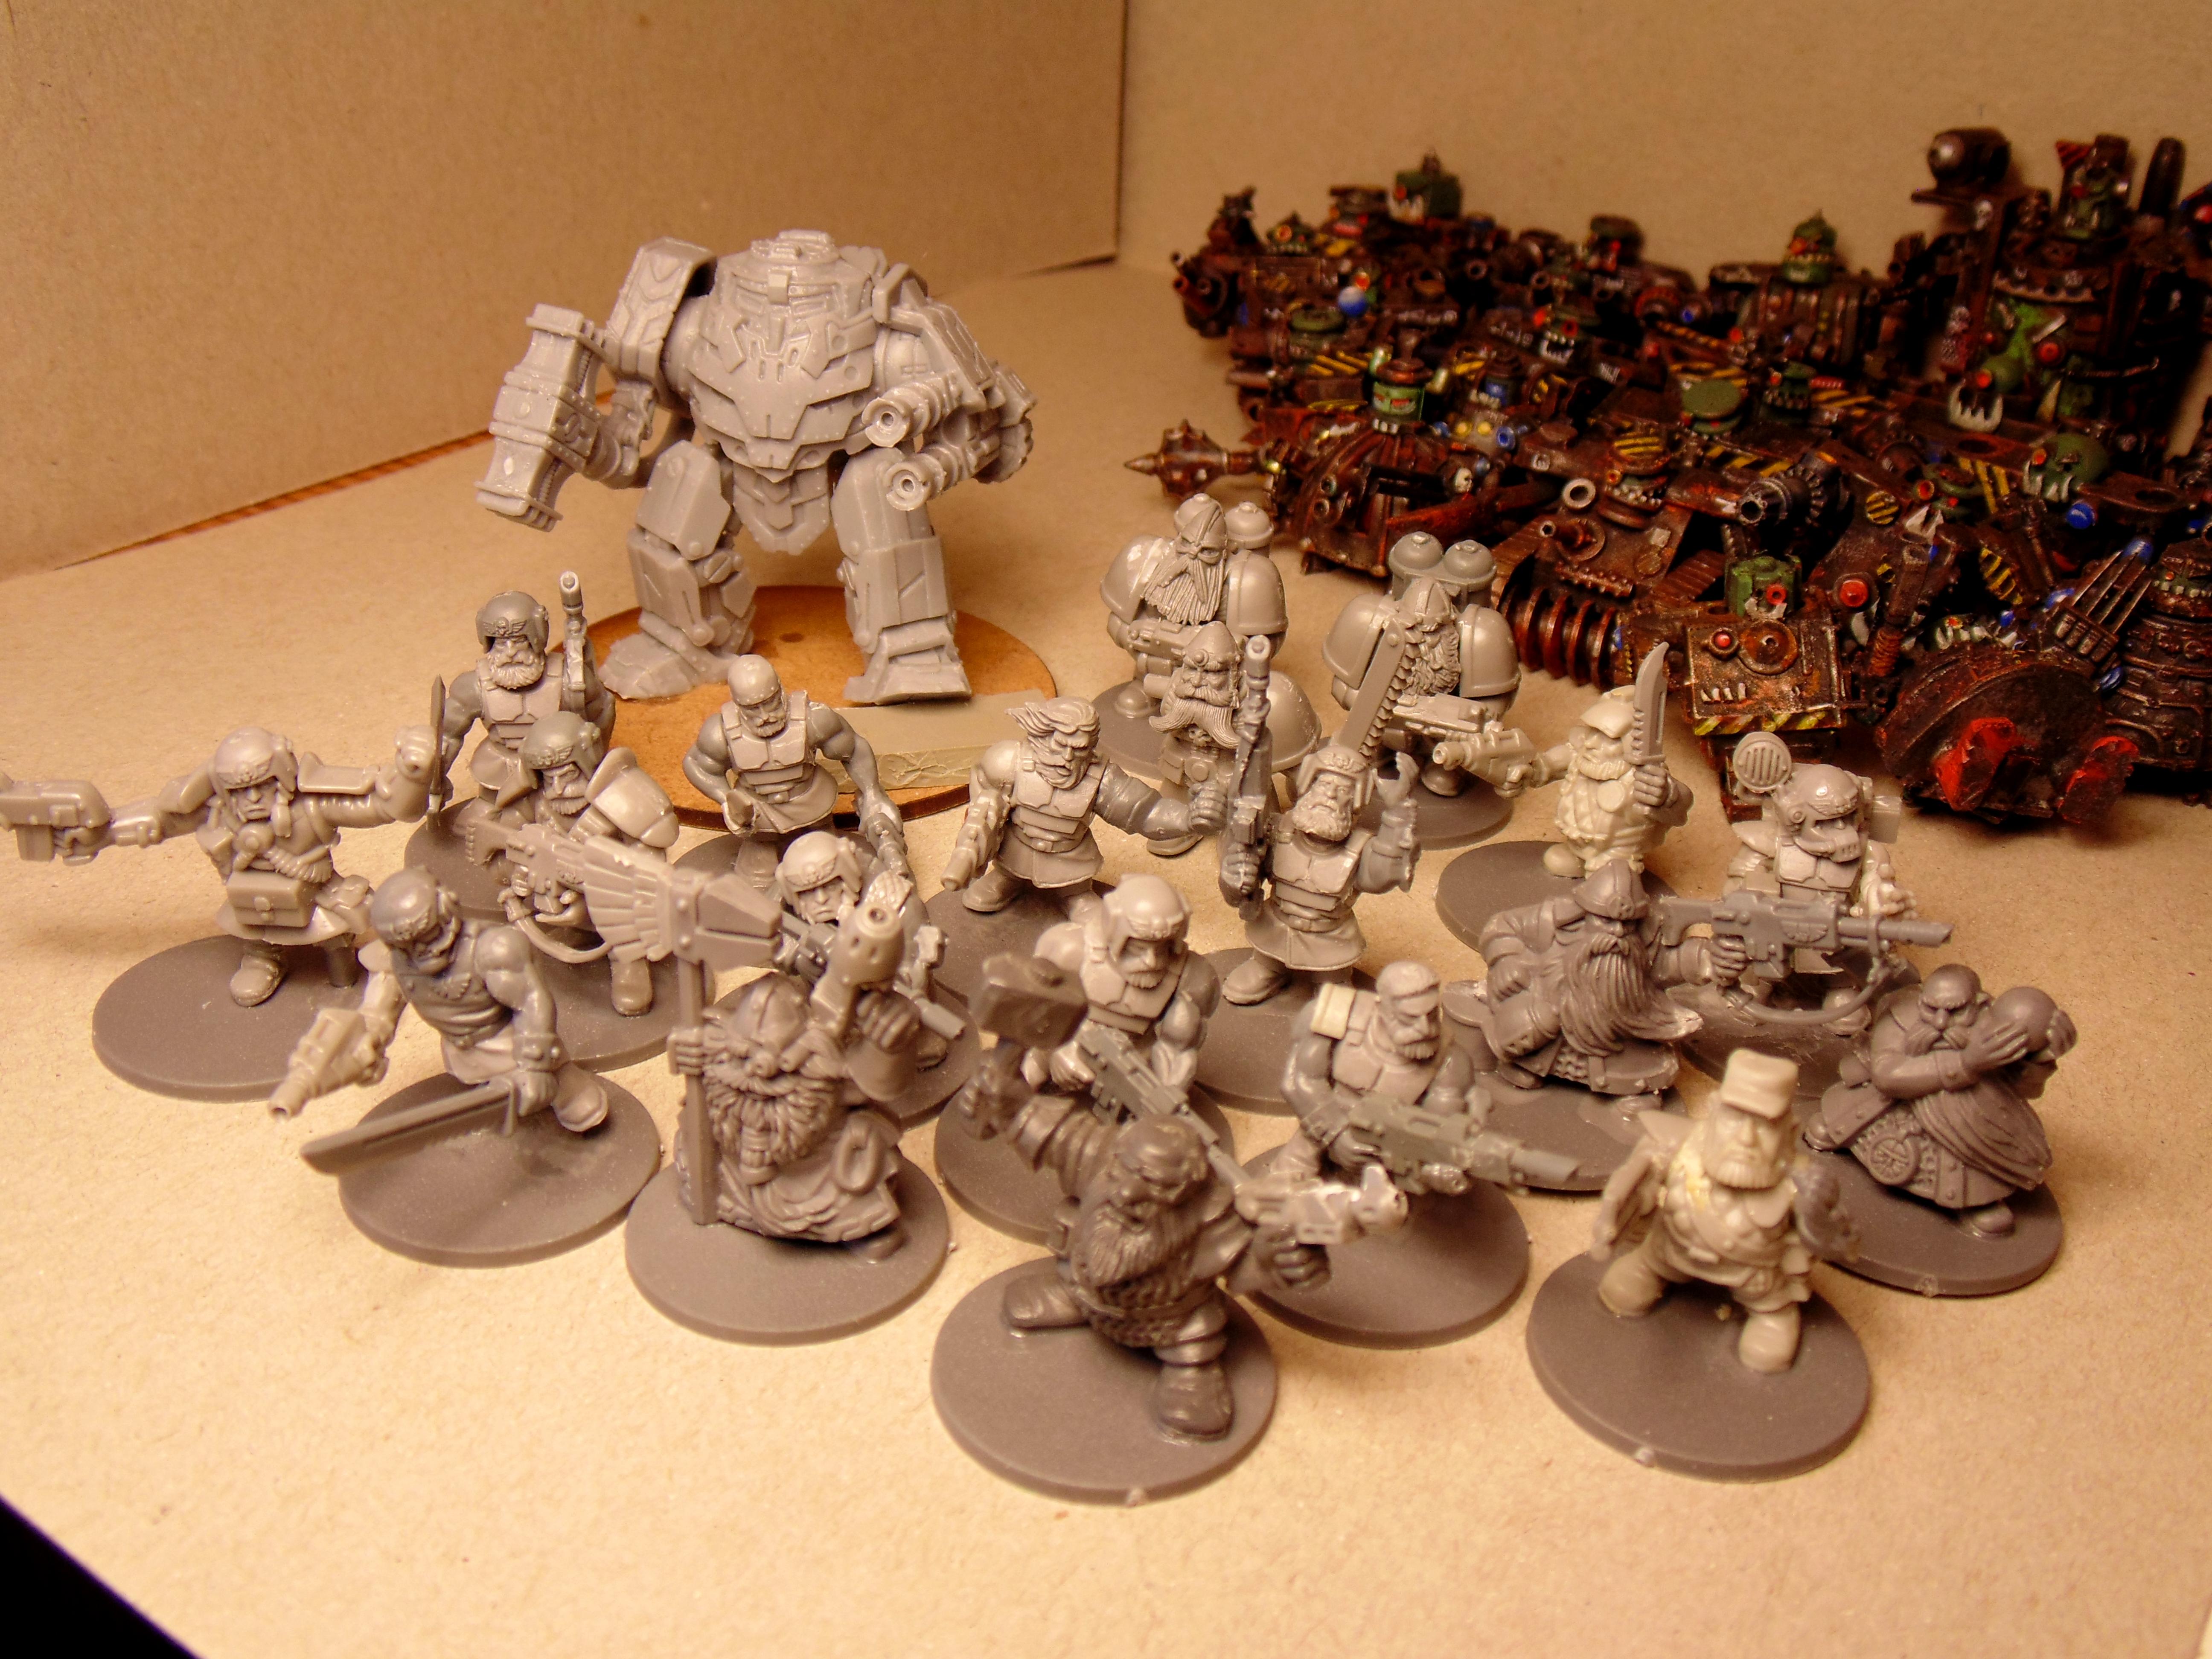 Army, Bike, Codex, Conversion, Dwarves, Exo, Exosuits, Imperial, Little, Old, Oldhammer, Rogue, School, Scratch, Scratch Build, Small, Soldiers, Space, Squad, Squats, Suit, Trader, Votann, White